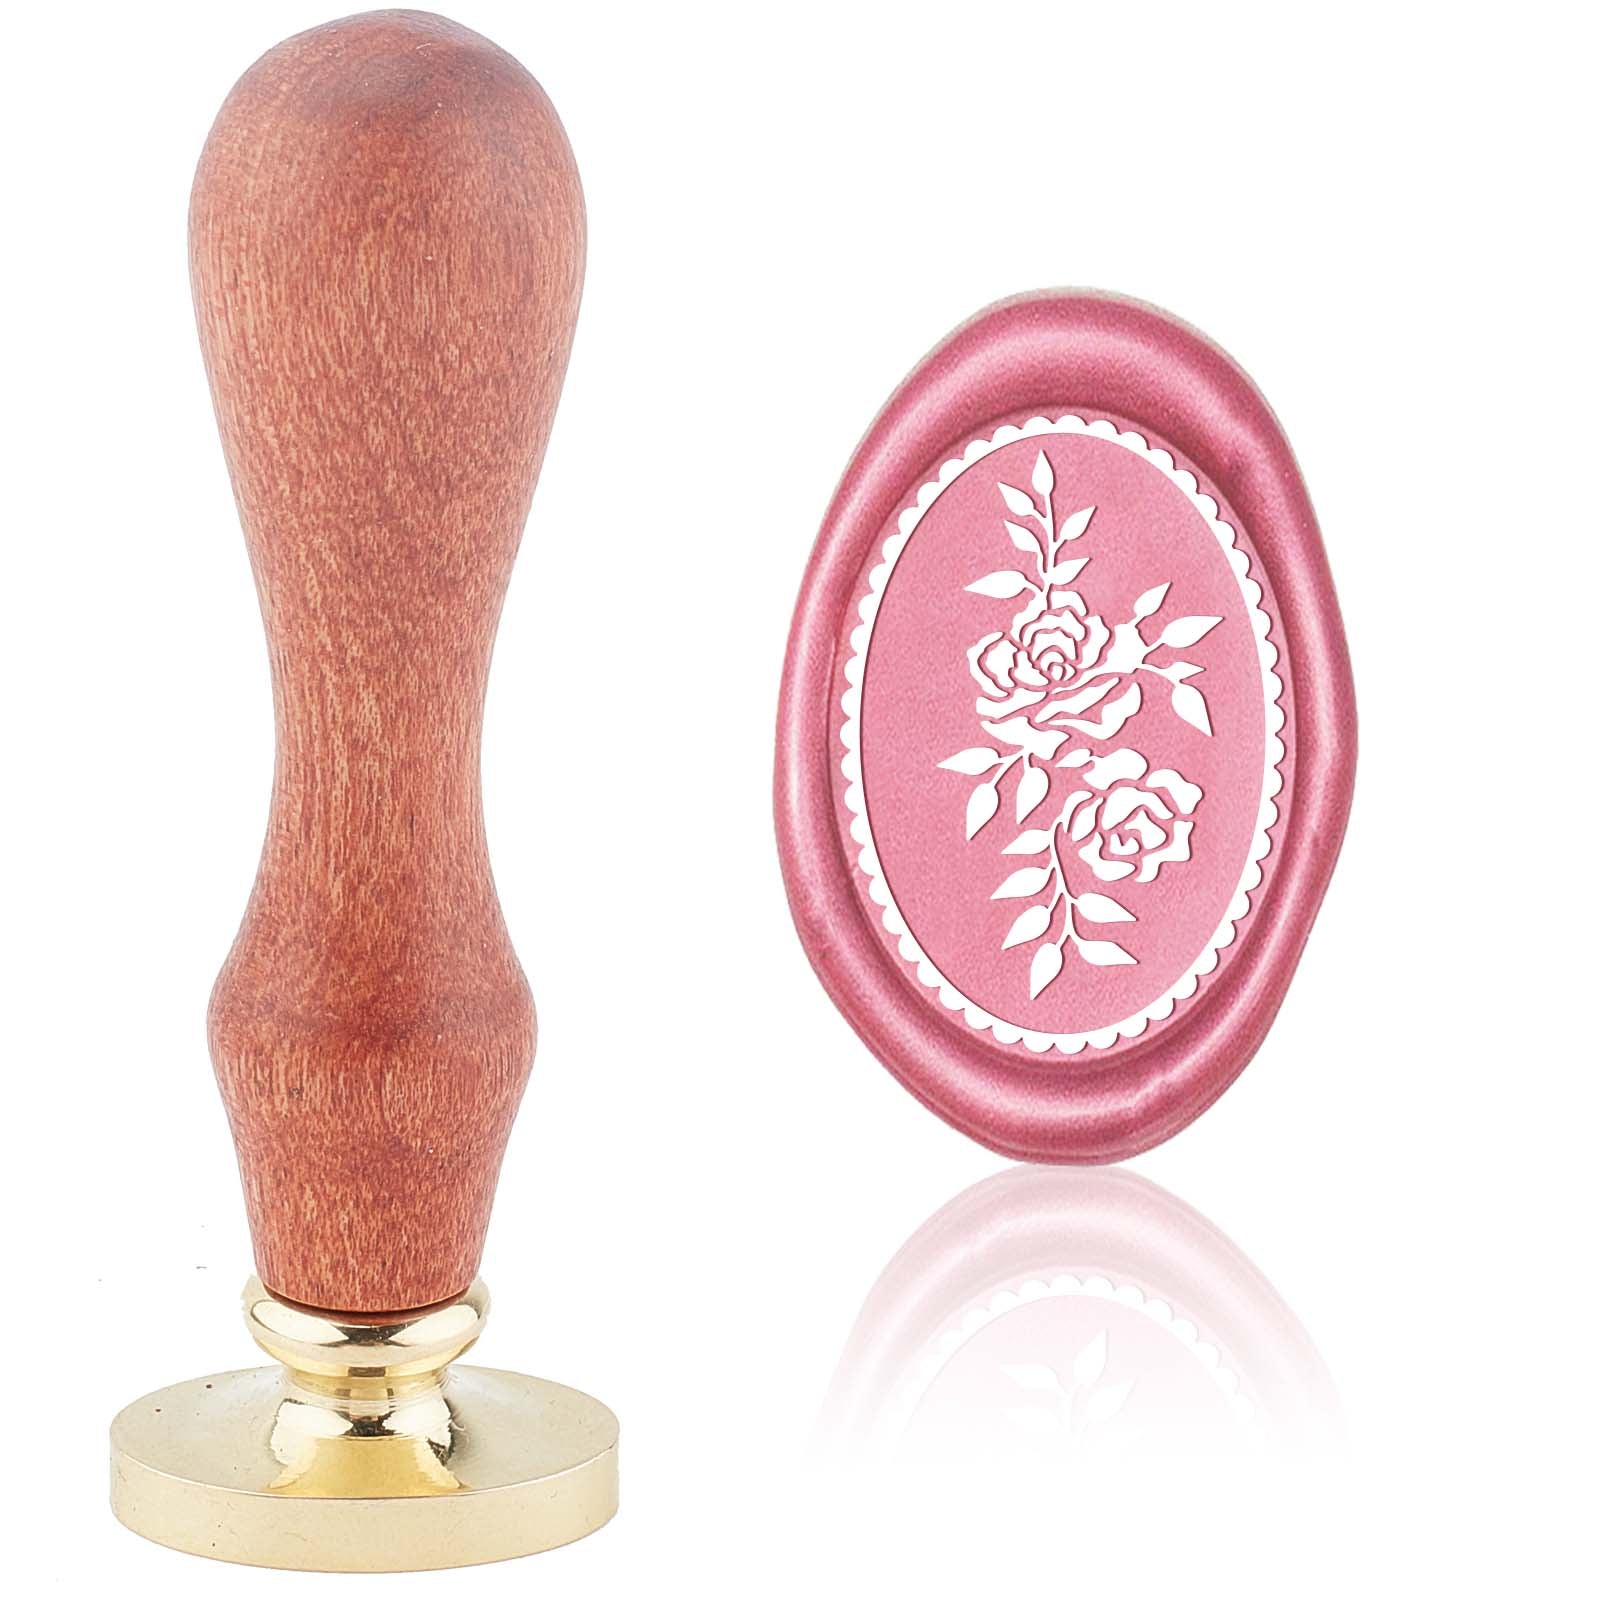 Rose Wood Handle Oval Wax Seal Stamp